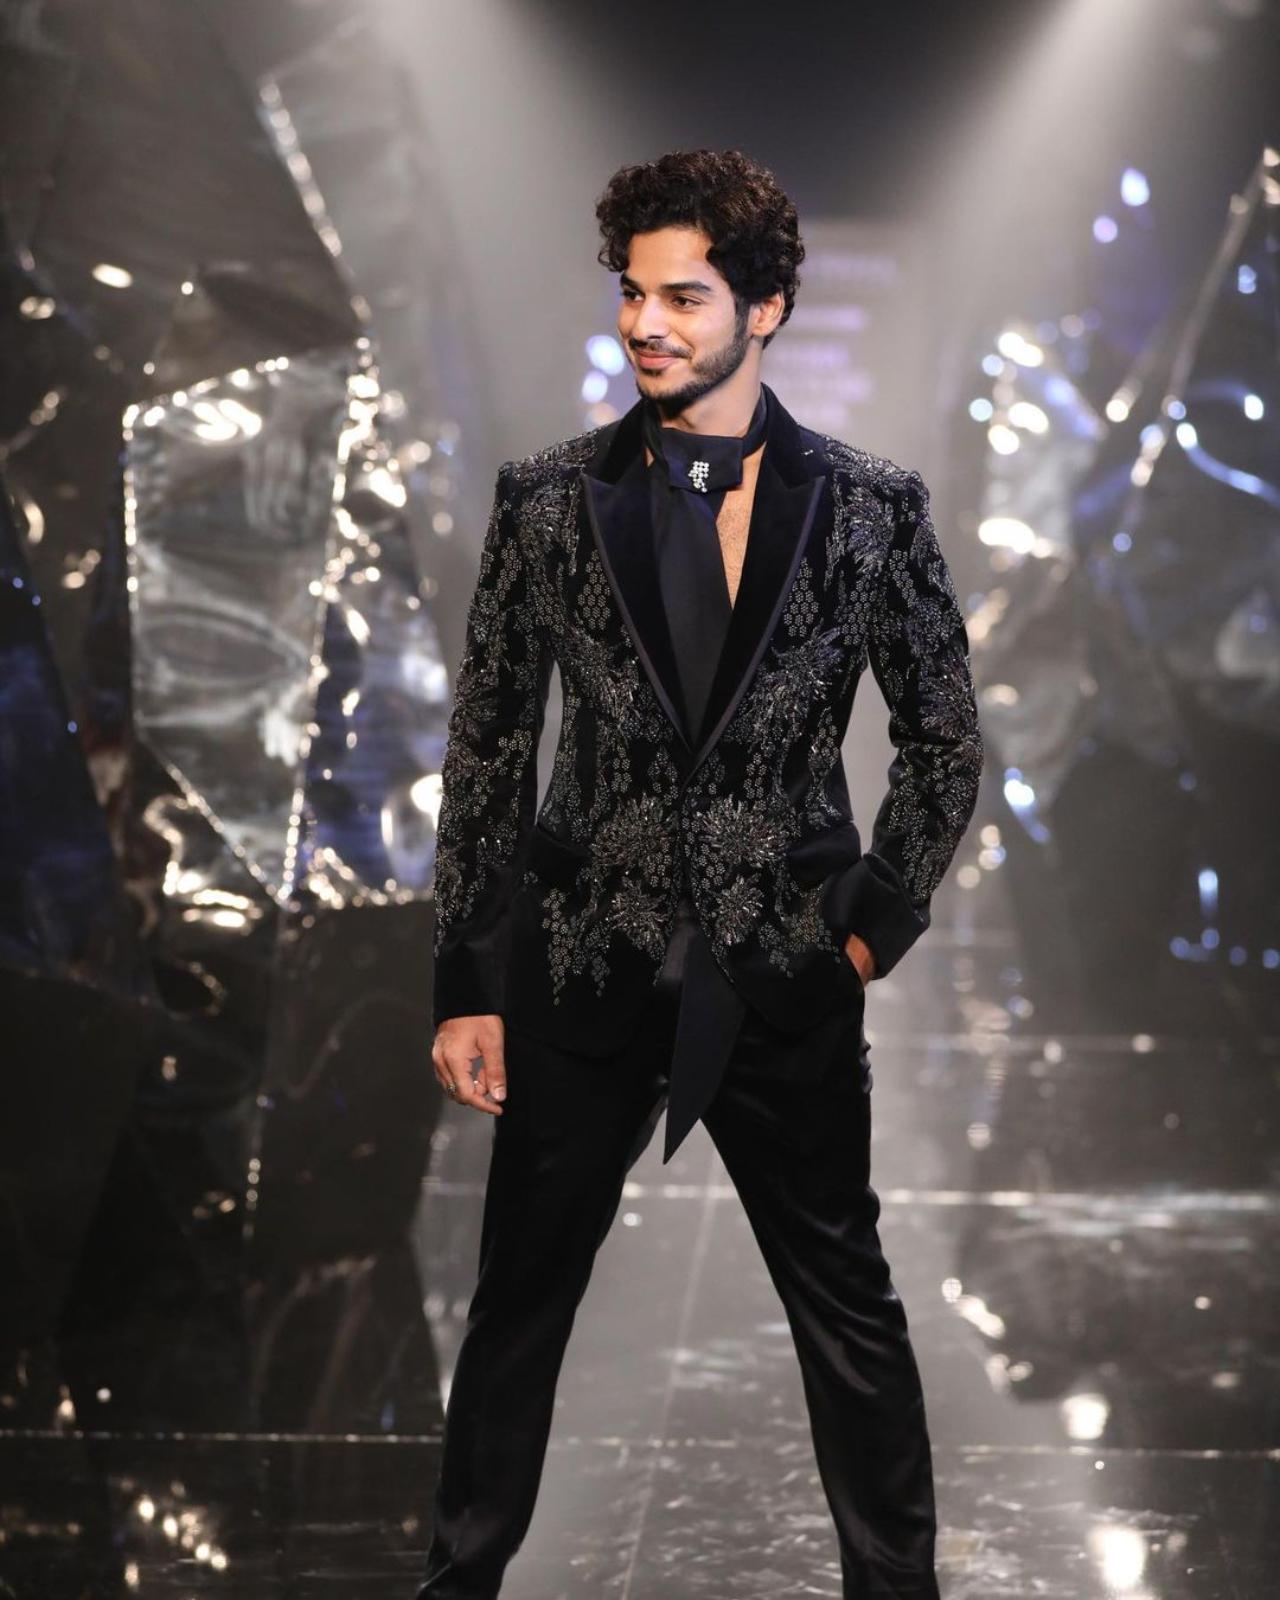 Ishan Khatter looked effortless debonair in a tailored black blazer adorned with shimmering embroidery and padded shoulders. He paired it with classy straight-cut satin pants